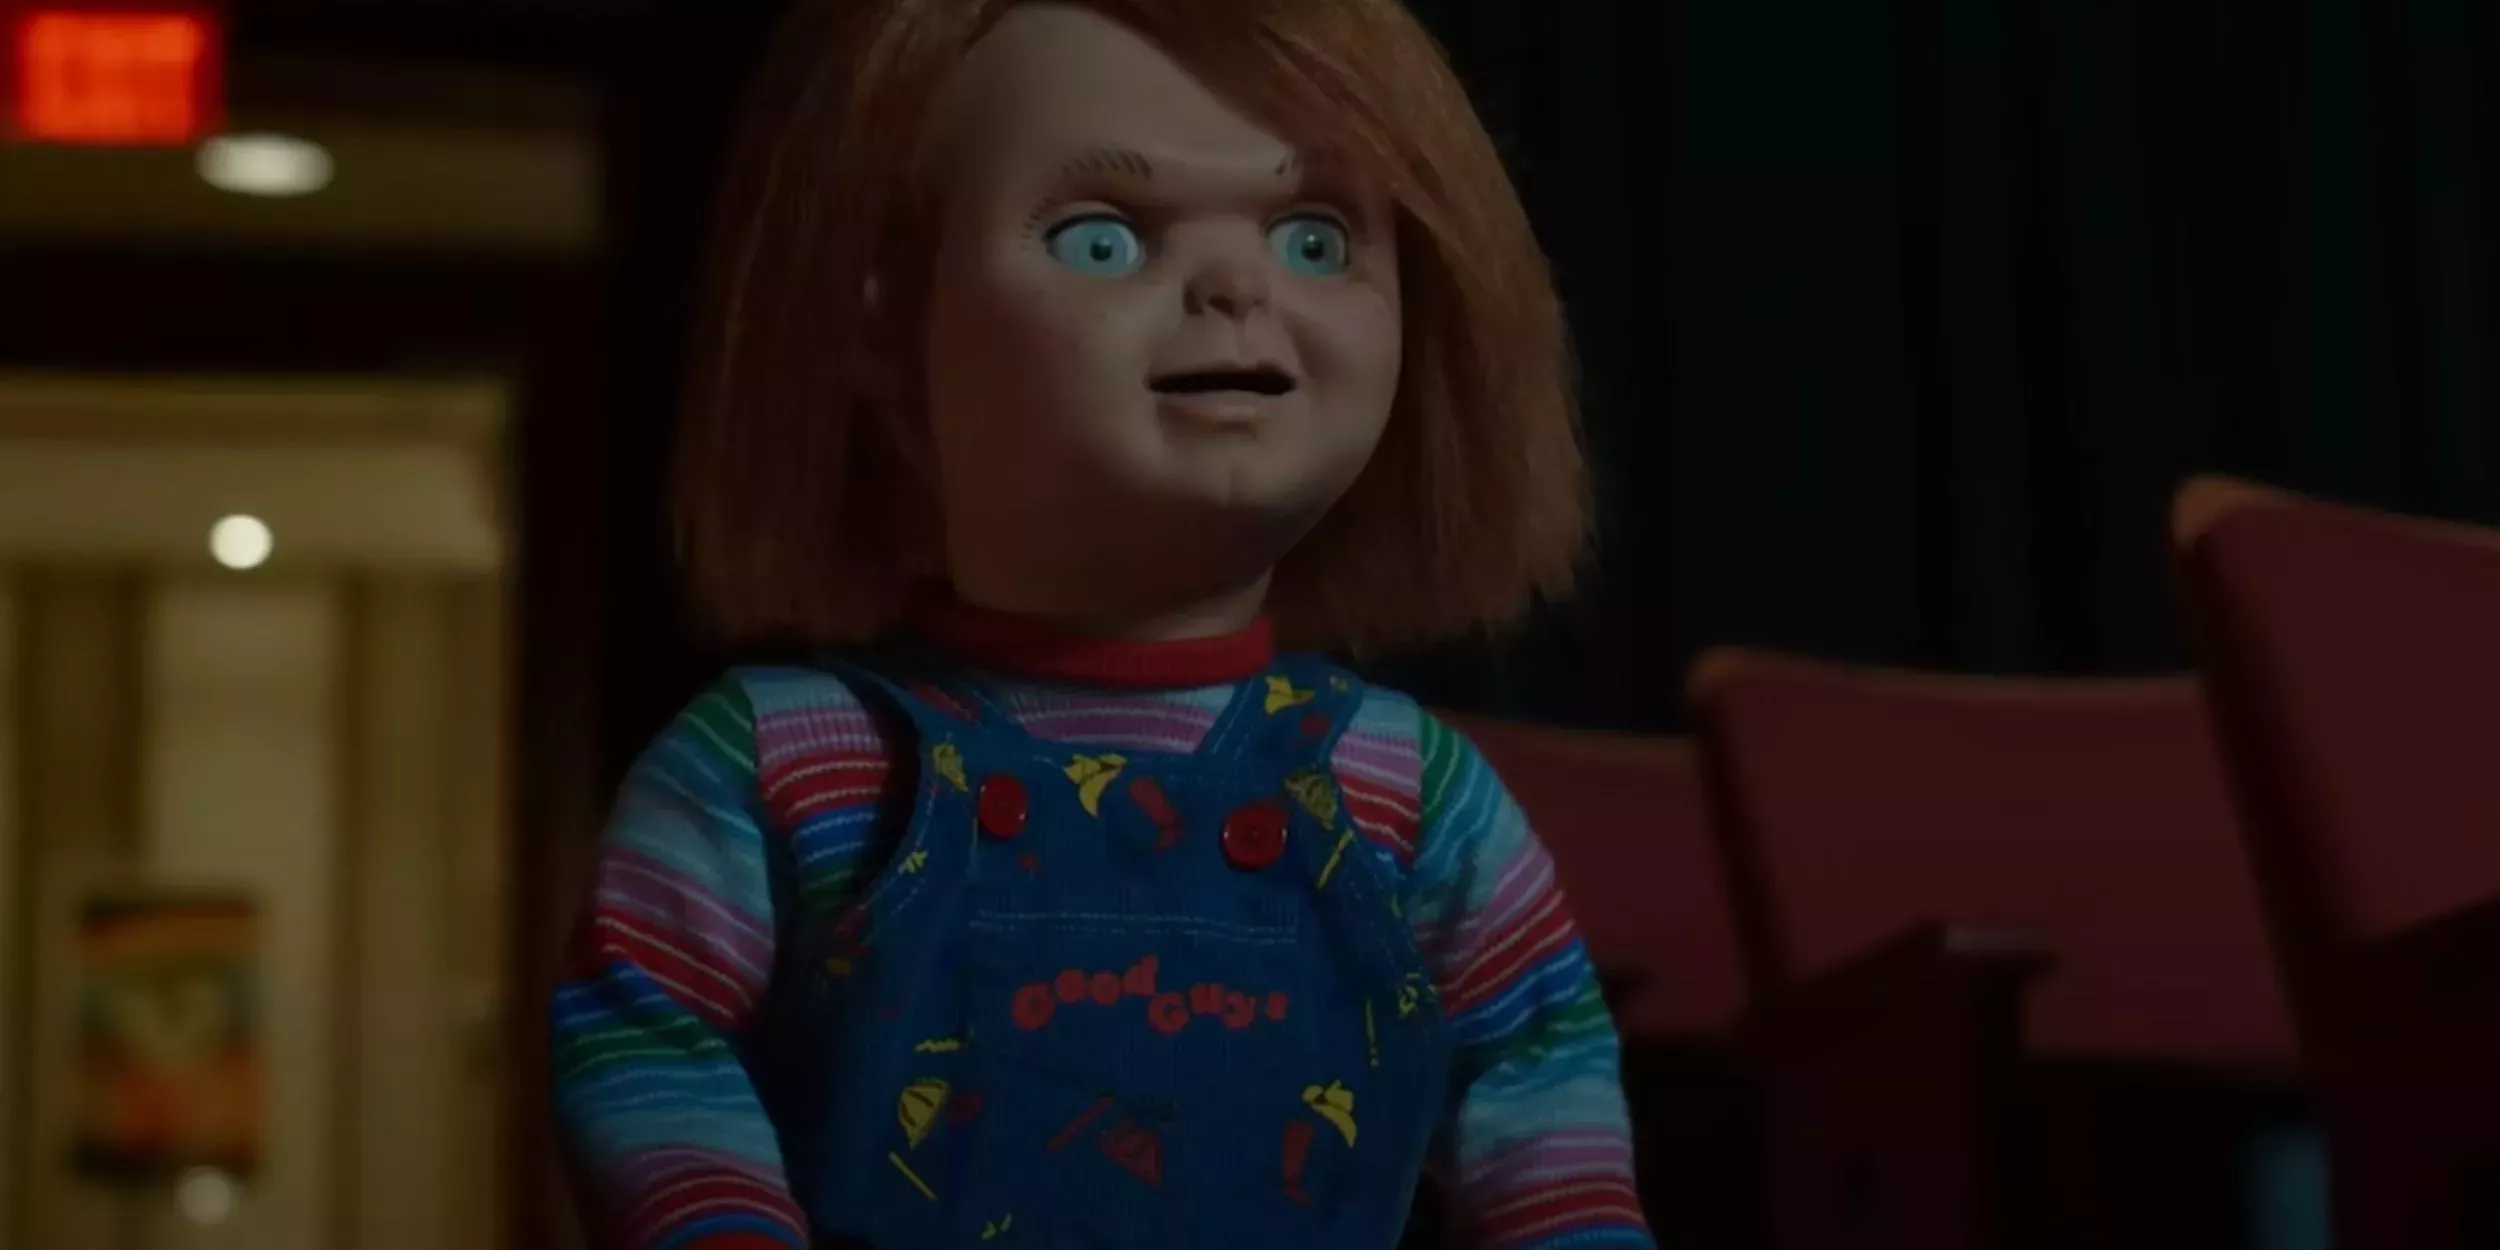 Chucky: Chucky confronts Jake in a movie theater